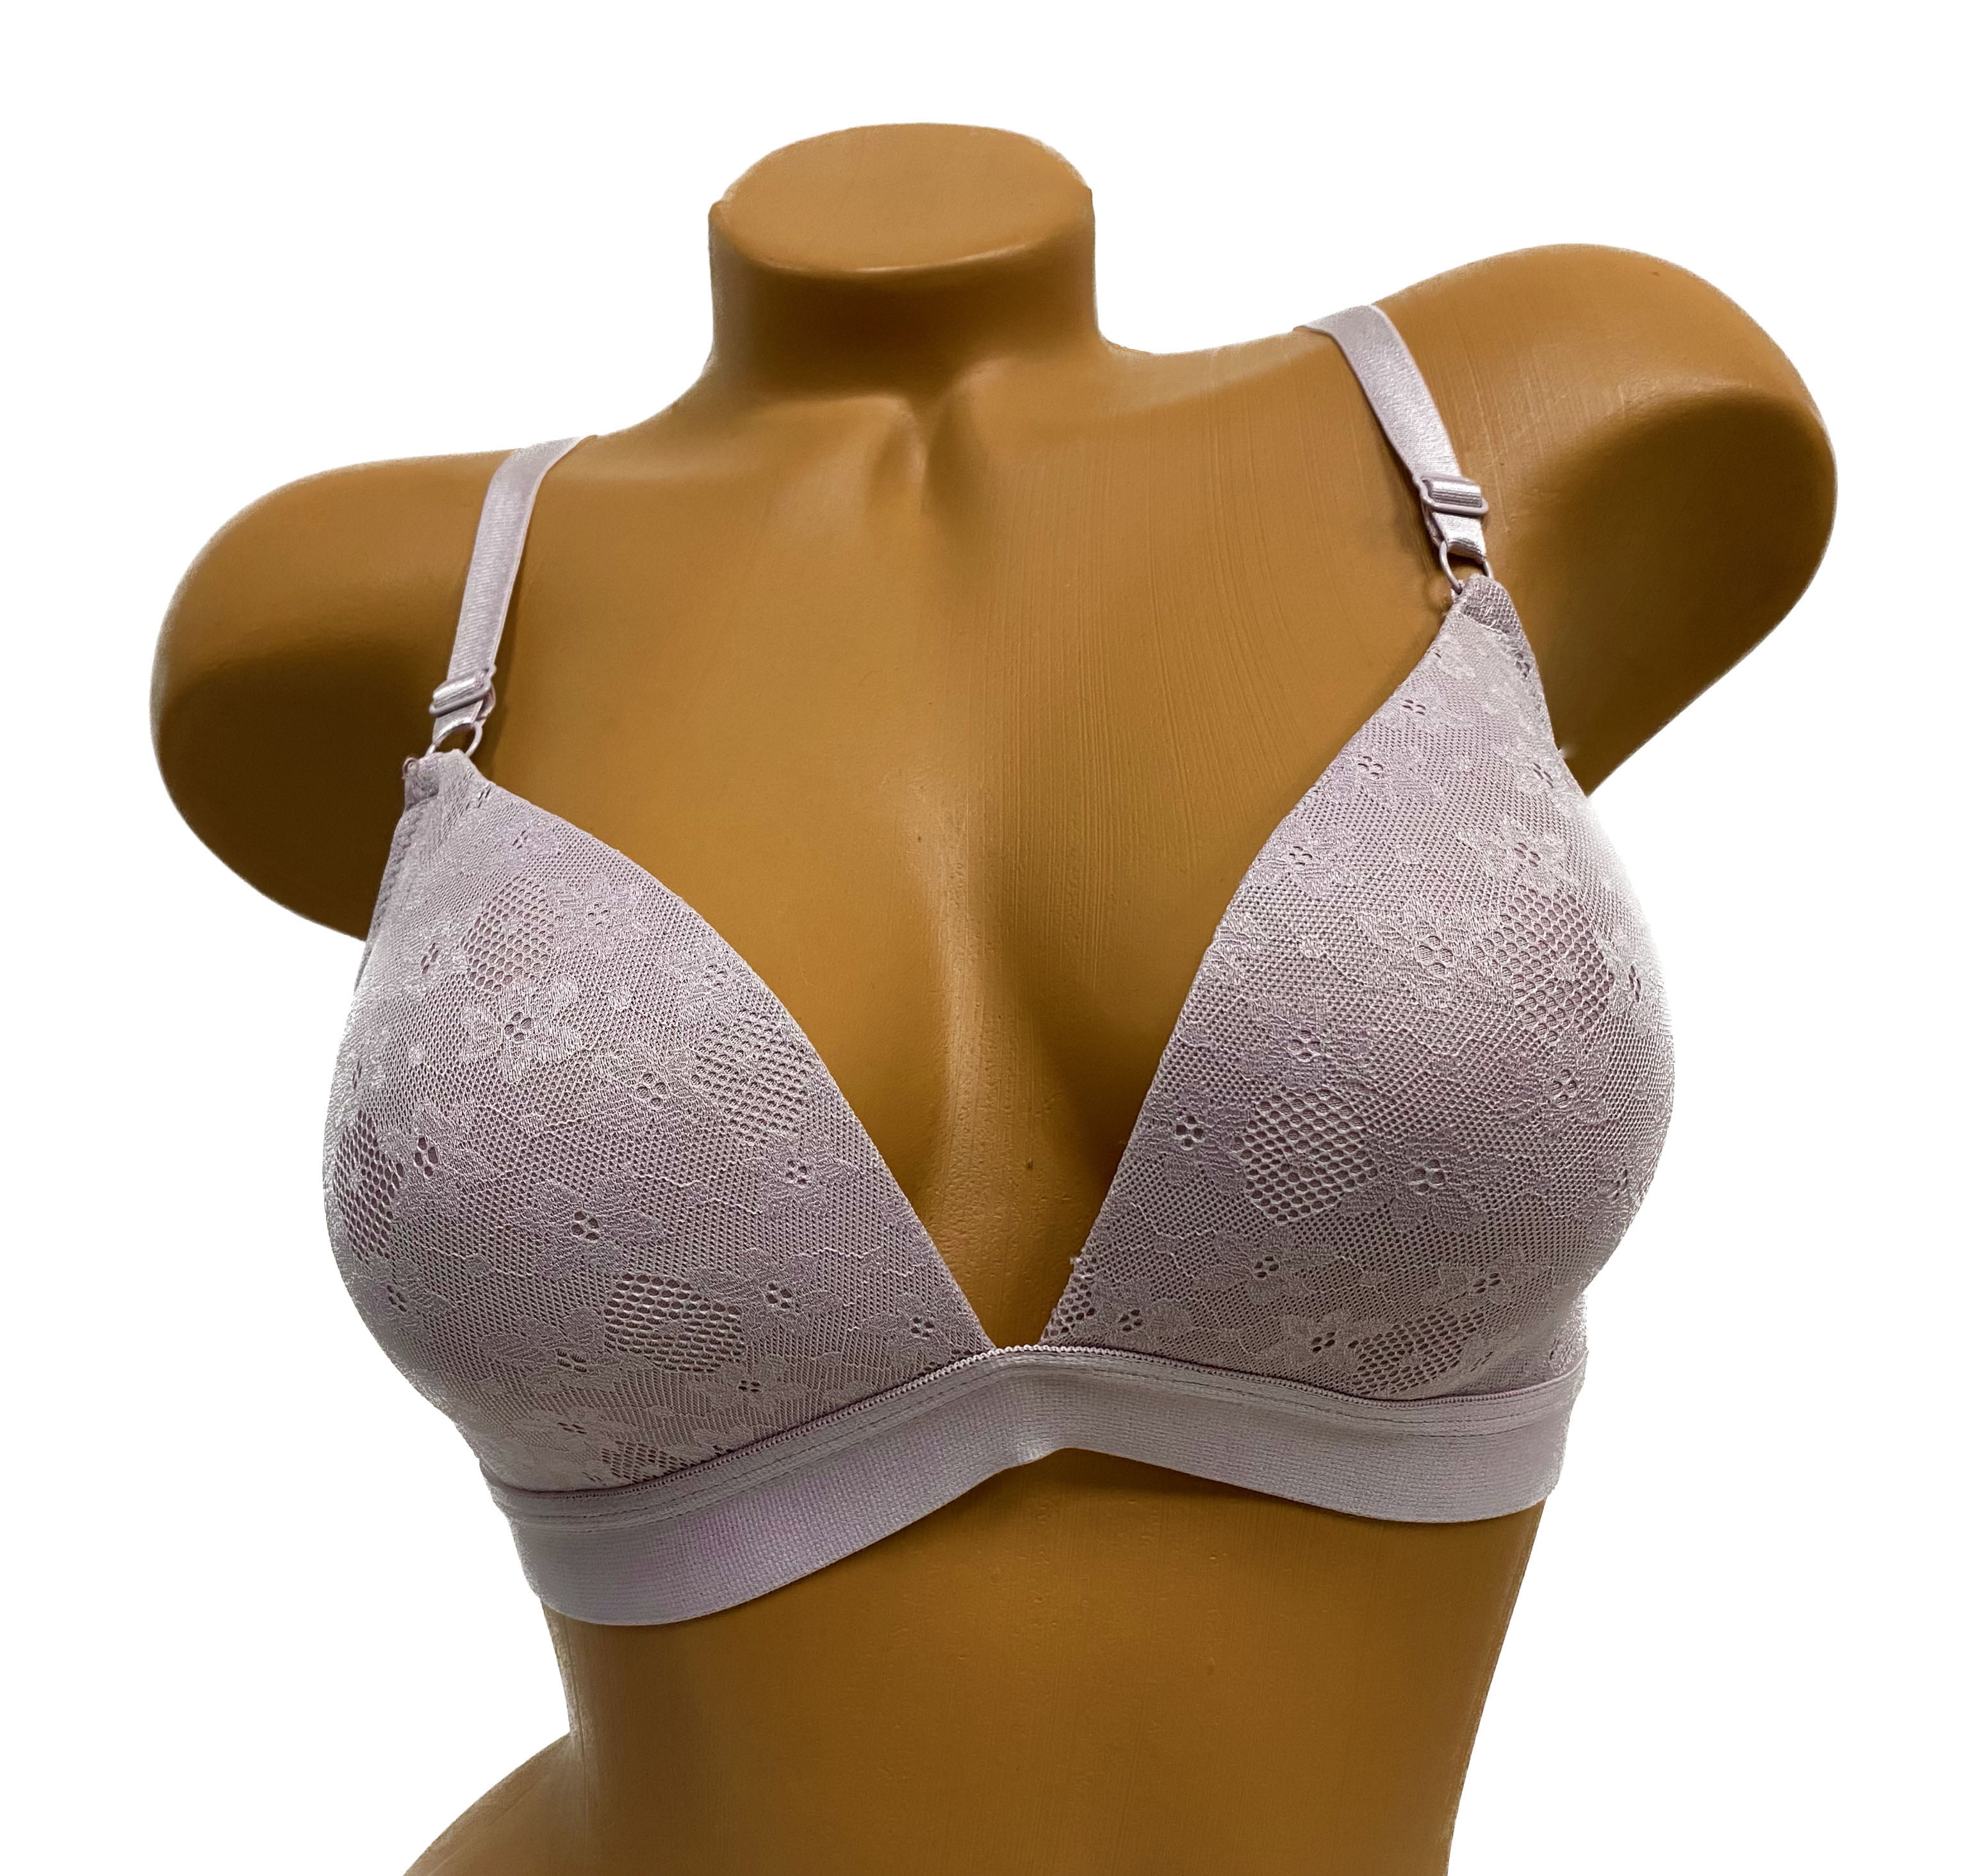 32C Bras: Bra Cup Size for 32C Boobs and Breast Size Getaggt 36DD -  HauteFlair